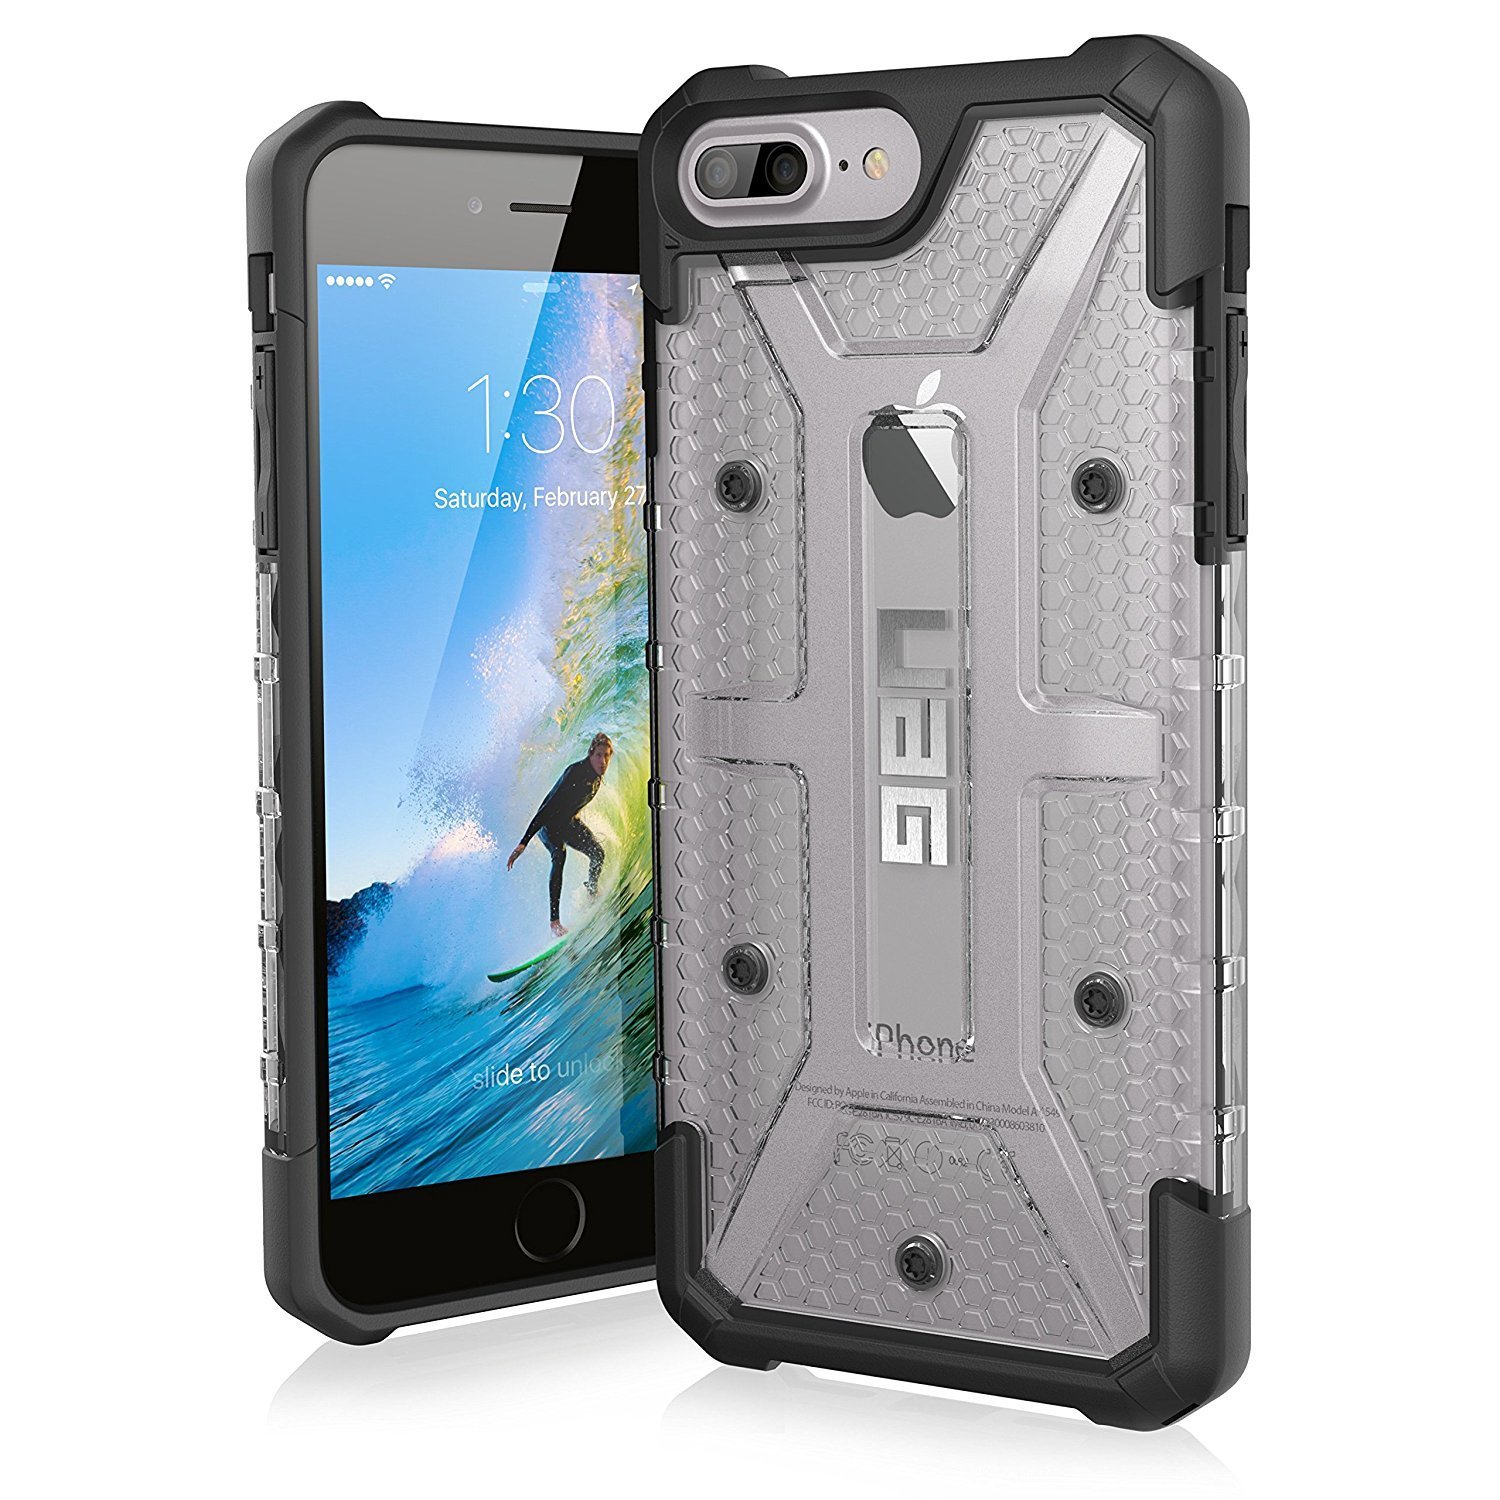 UAG iPhone 8, 8 Plus/iPhone 7, 7 Plus/iPhone 6s, 6s Plus [5.5-inch screen] Monarch & Plasma Feather-Light Rugged Military Drop Tested iPhone Case.